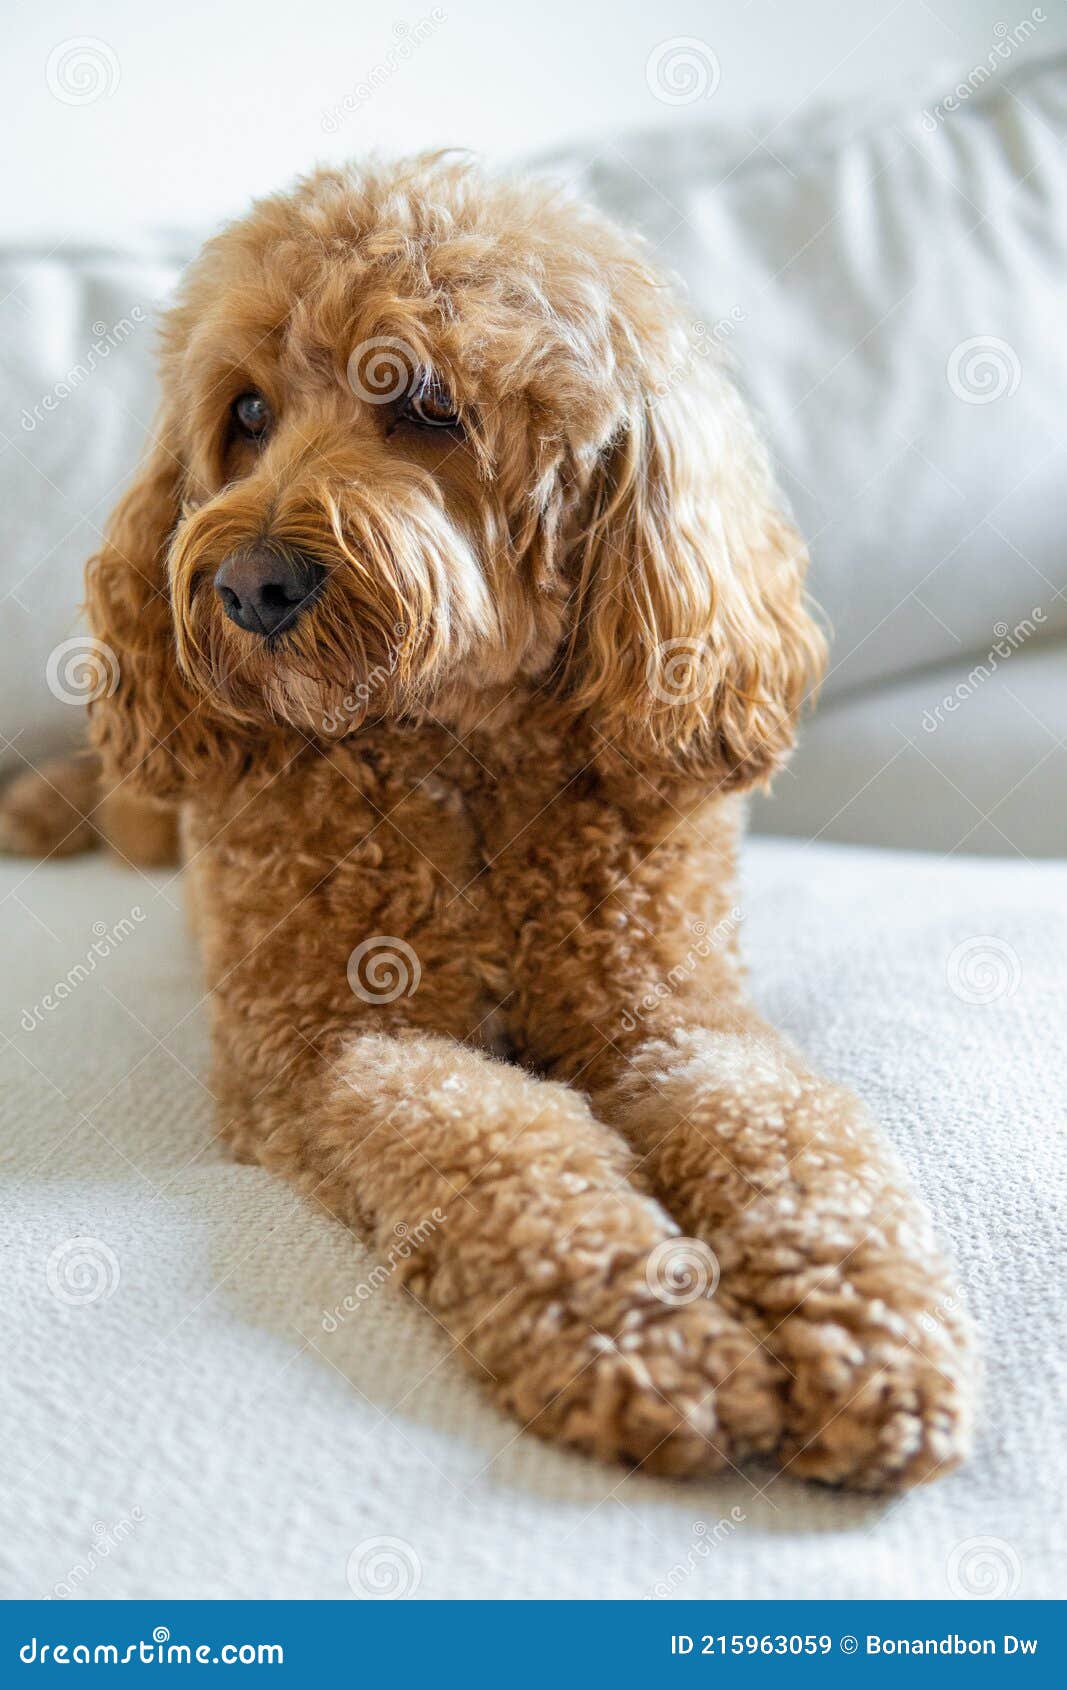 Cavapoo Mixed -breed of Cavalier King Charles Spaniel and Stock Image Image of cute, head: 215963059